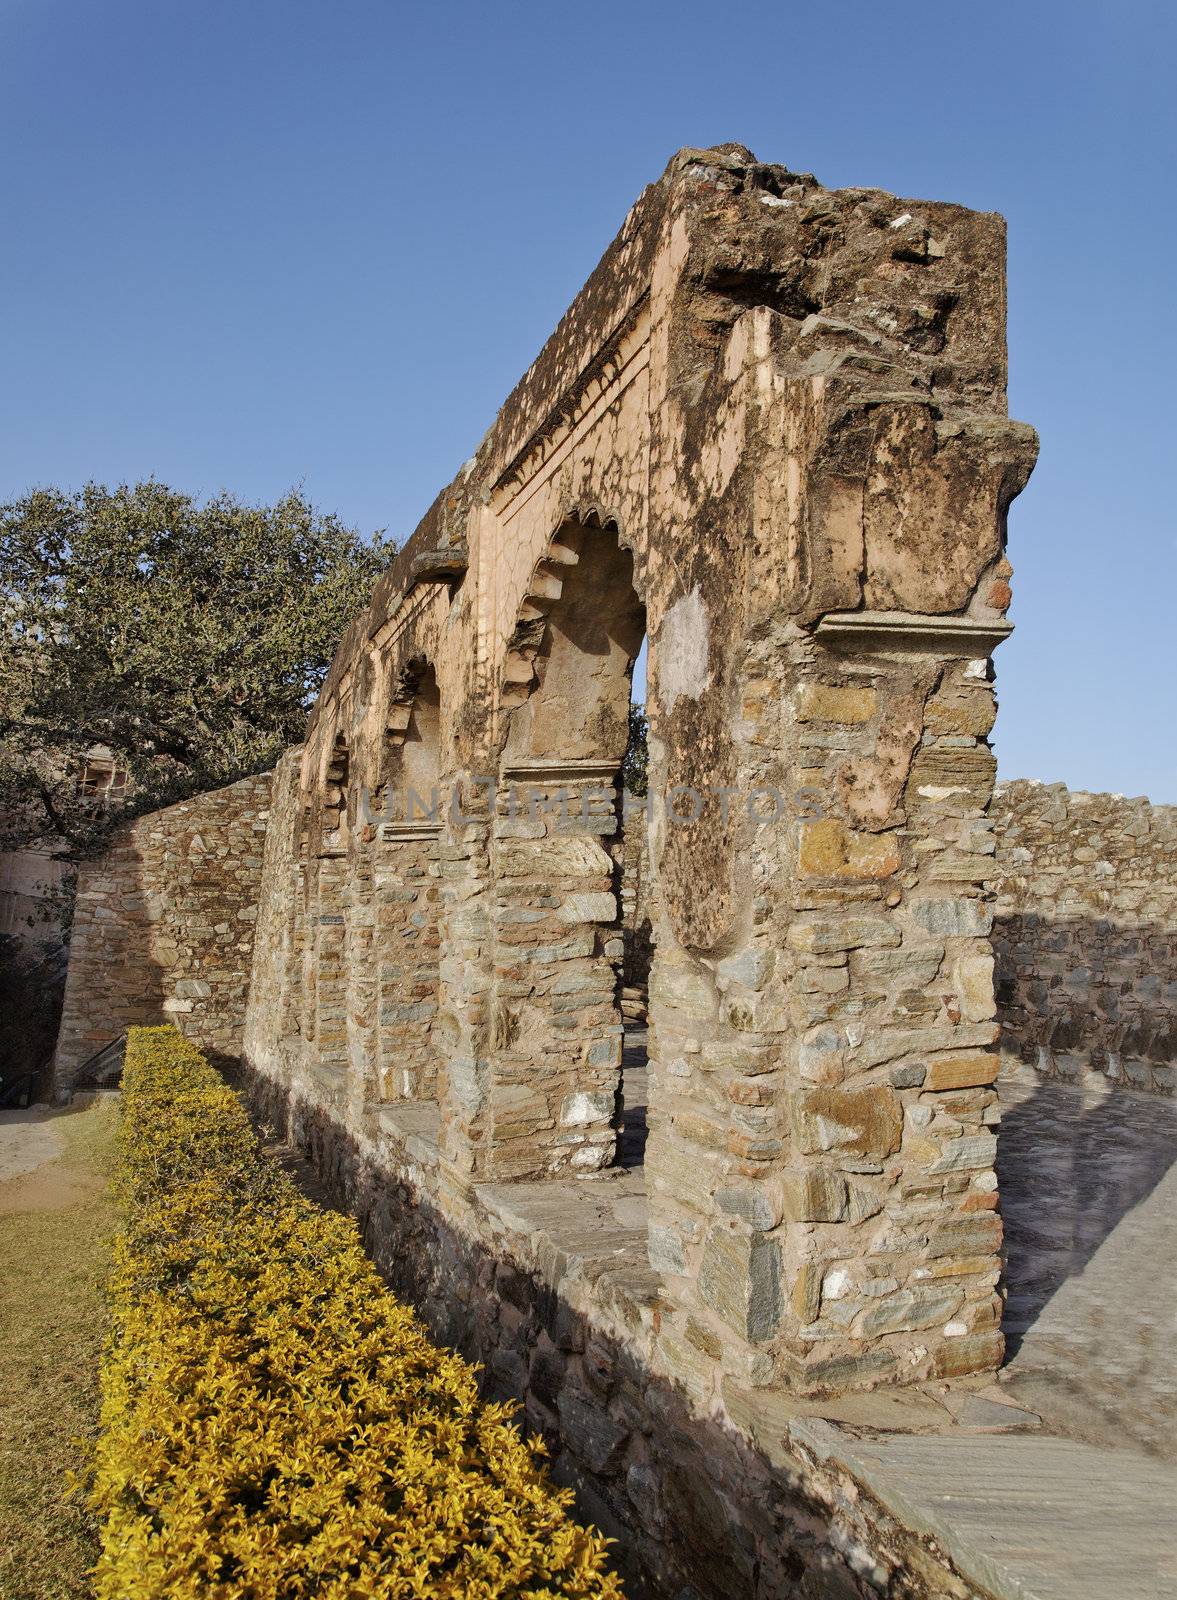 Arches form a strong feature around the royal quarters at Kumbhalghar Fort in the gardens